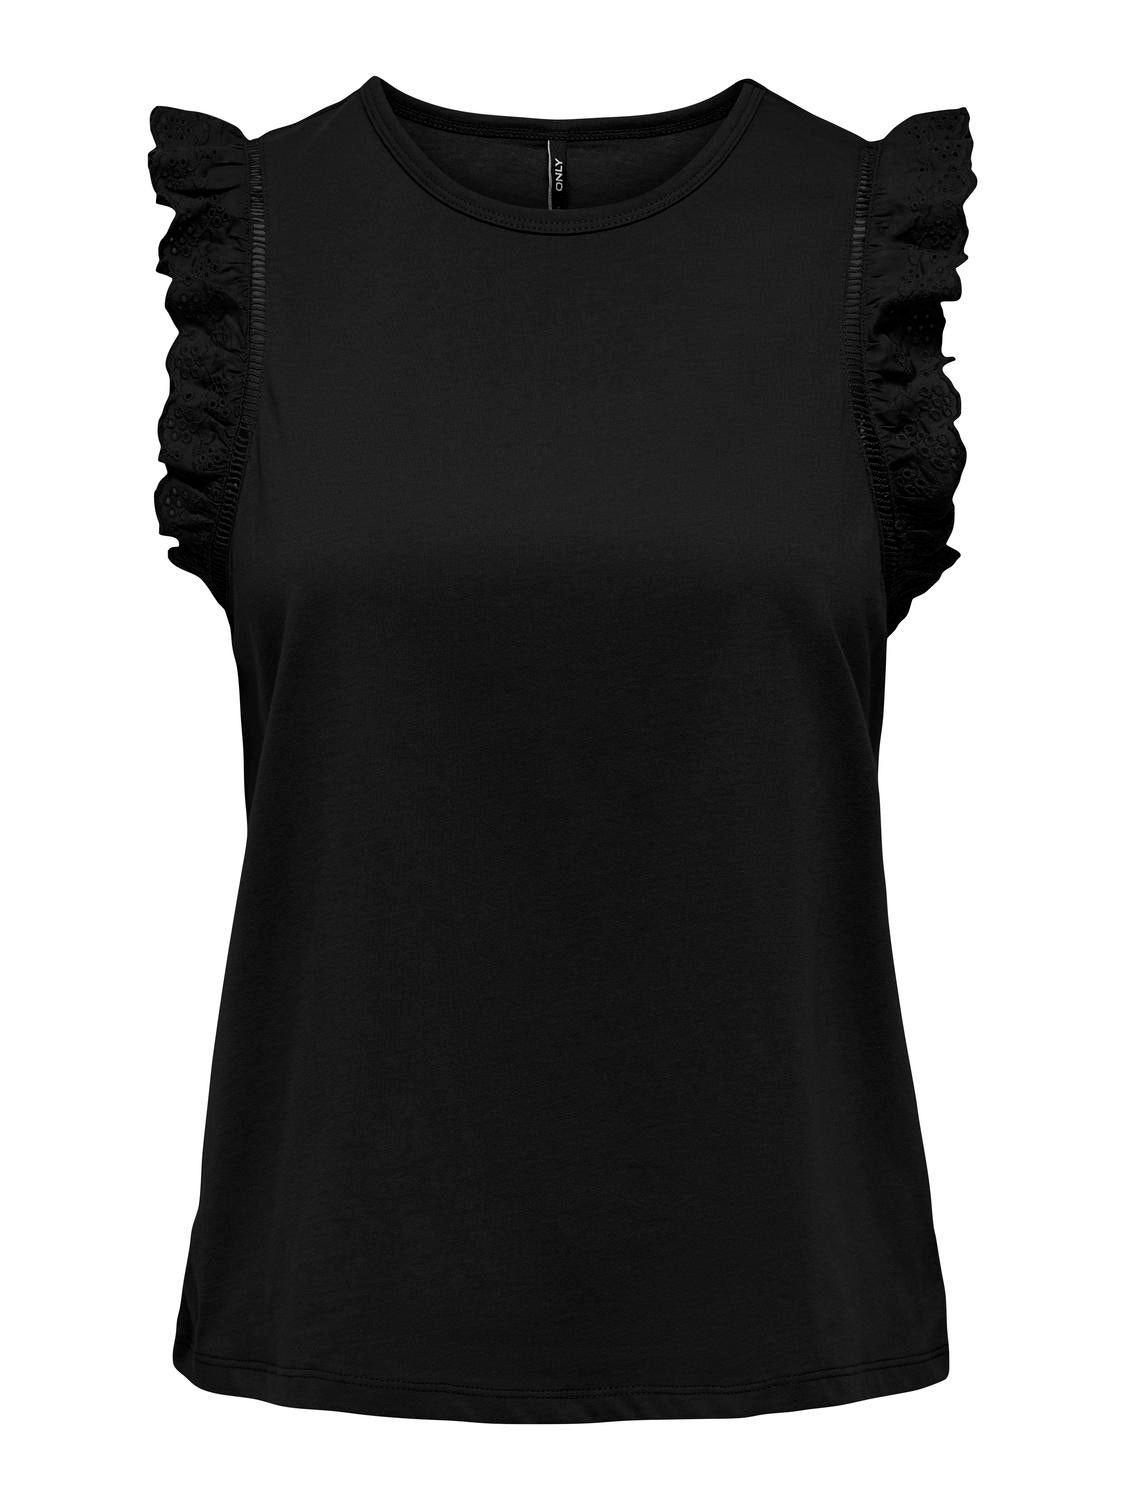 ONLY Top With Ruffle Sleeves -Black - 15289579